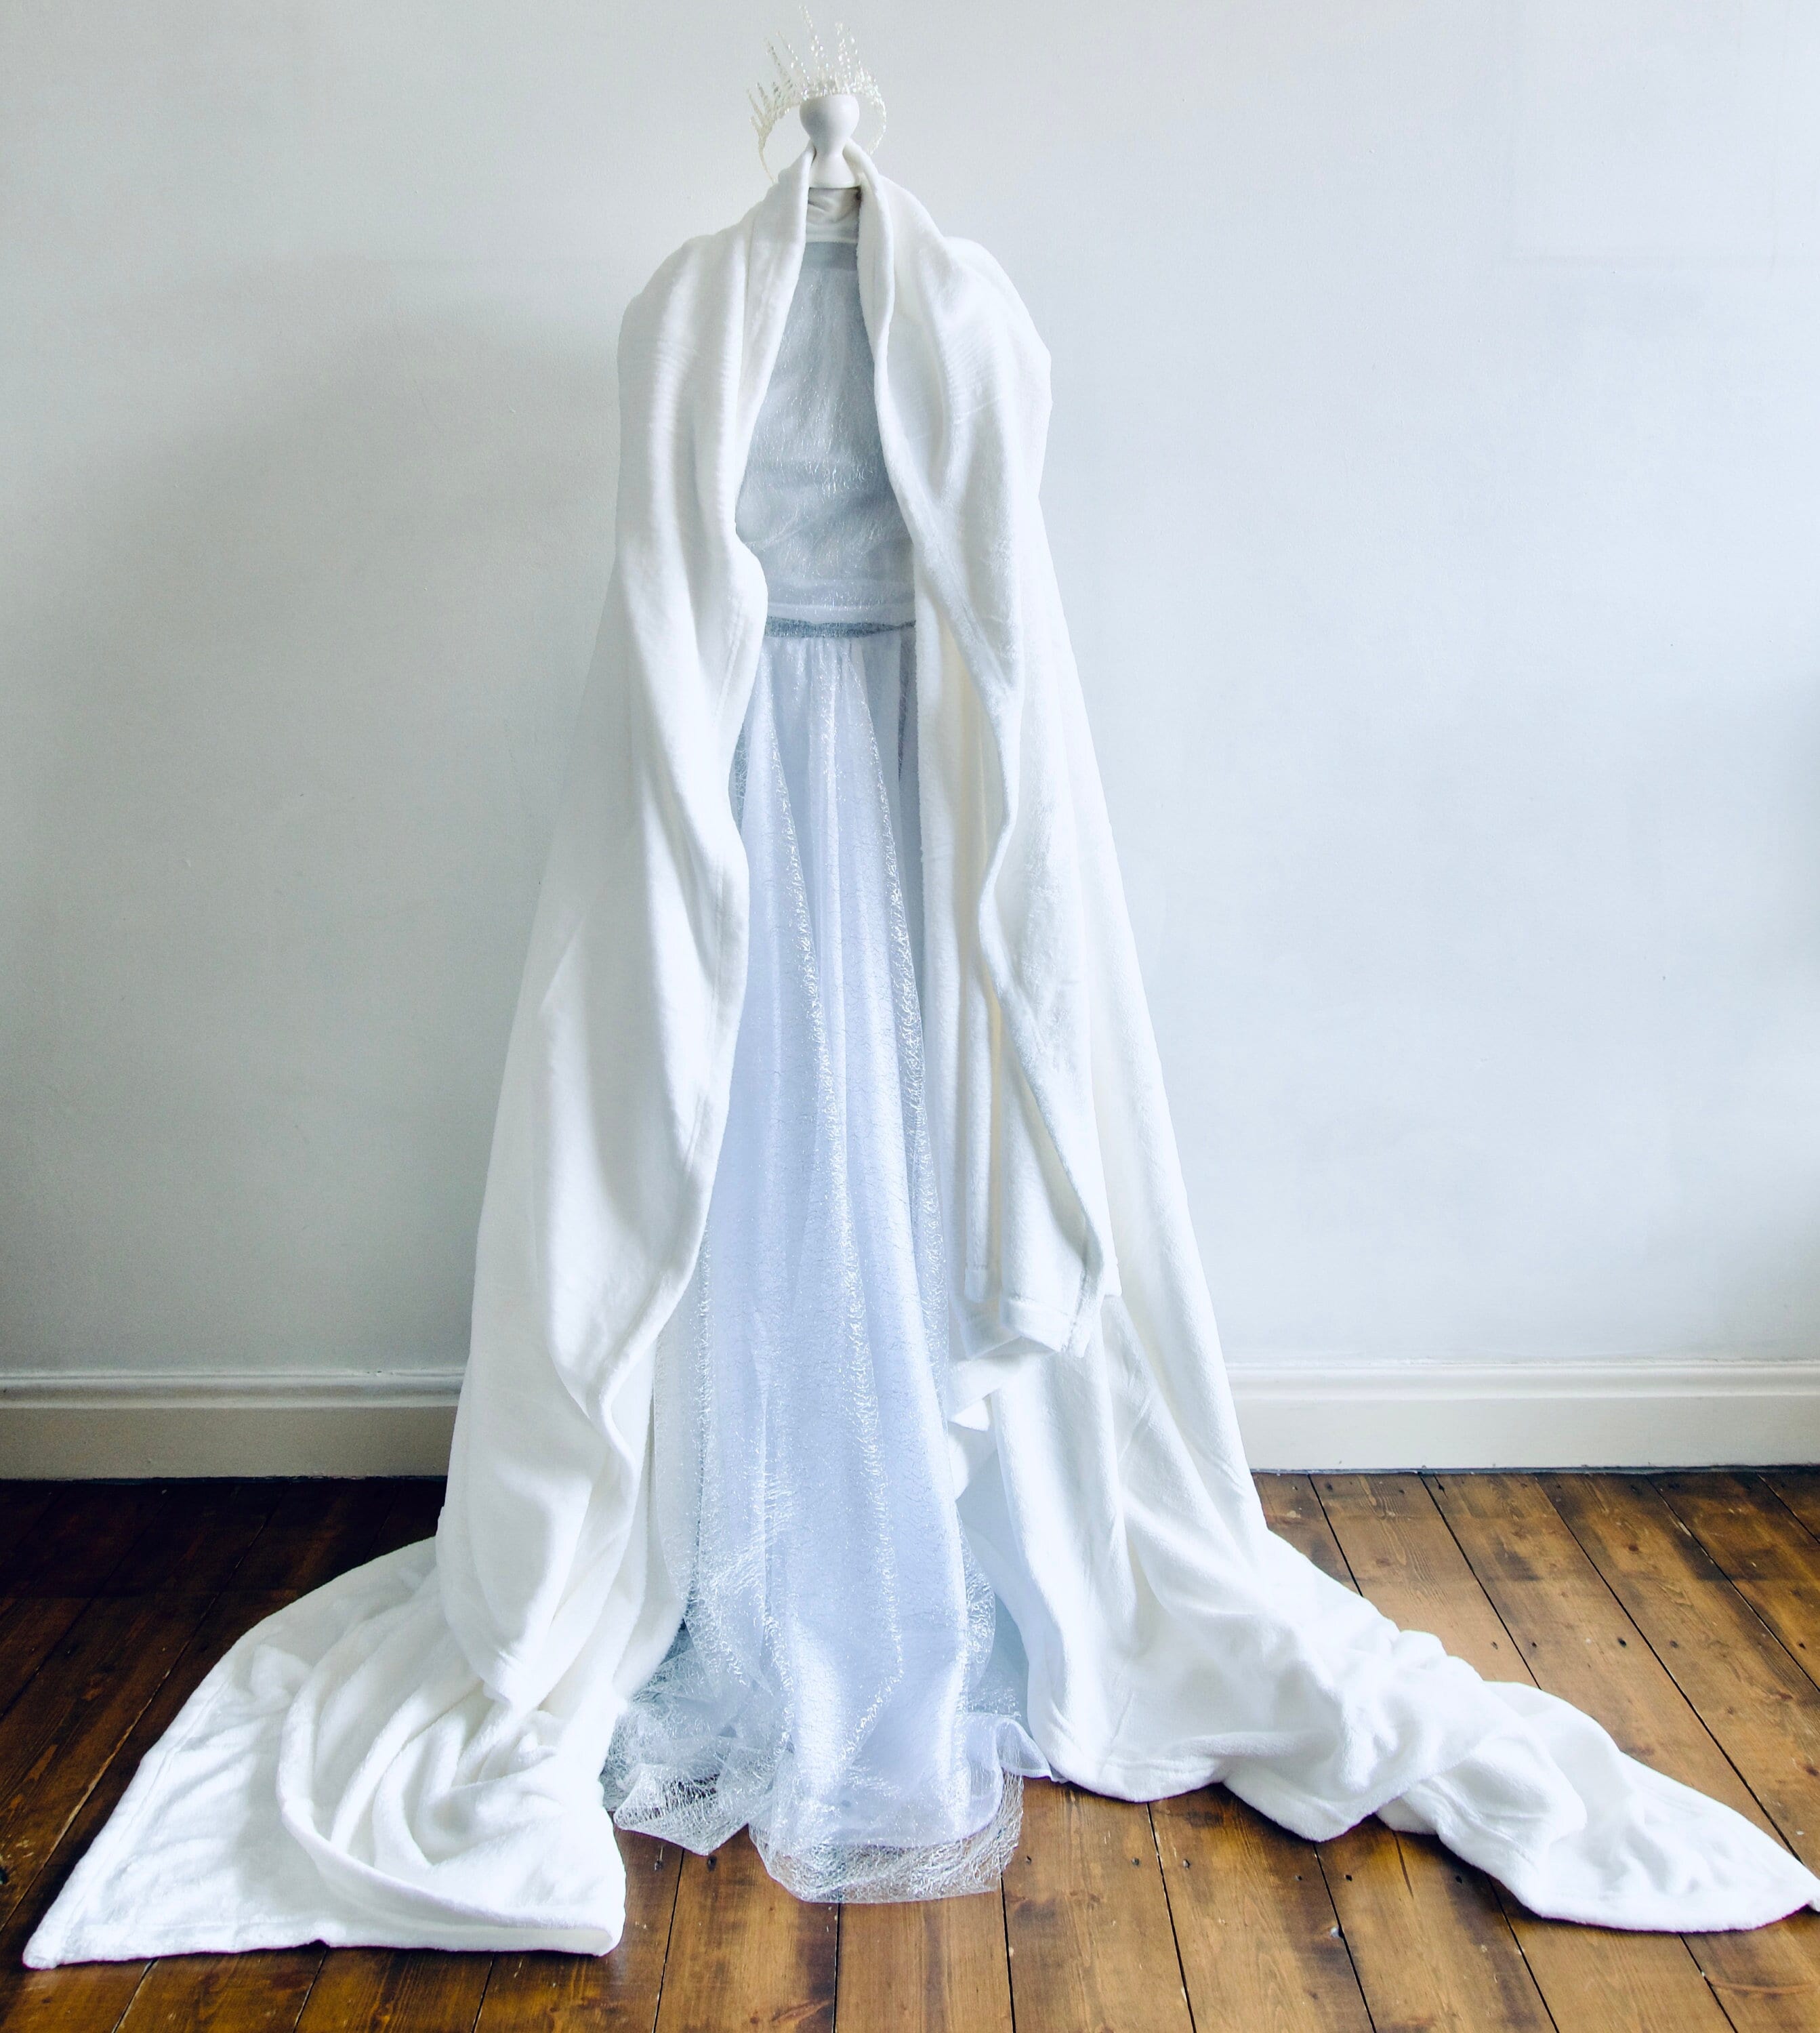 Halloween White Witch Chronicles of Narnia Inspired Costume - Etsy